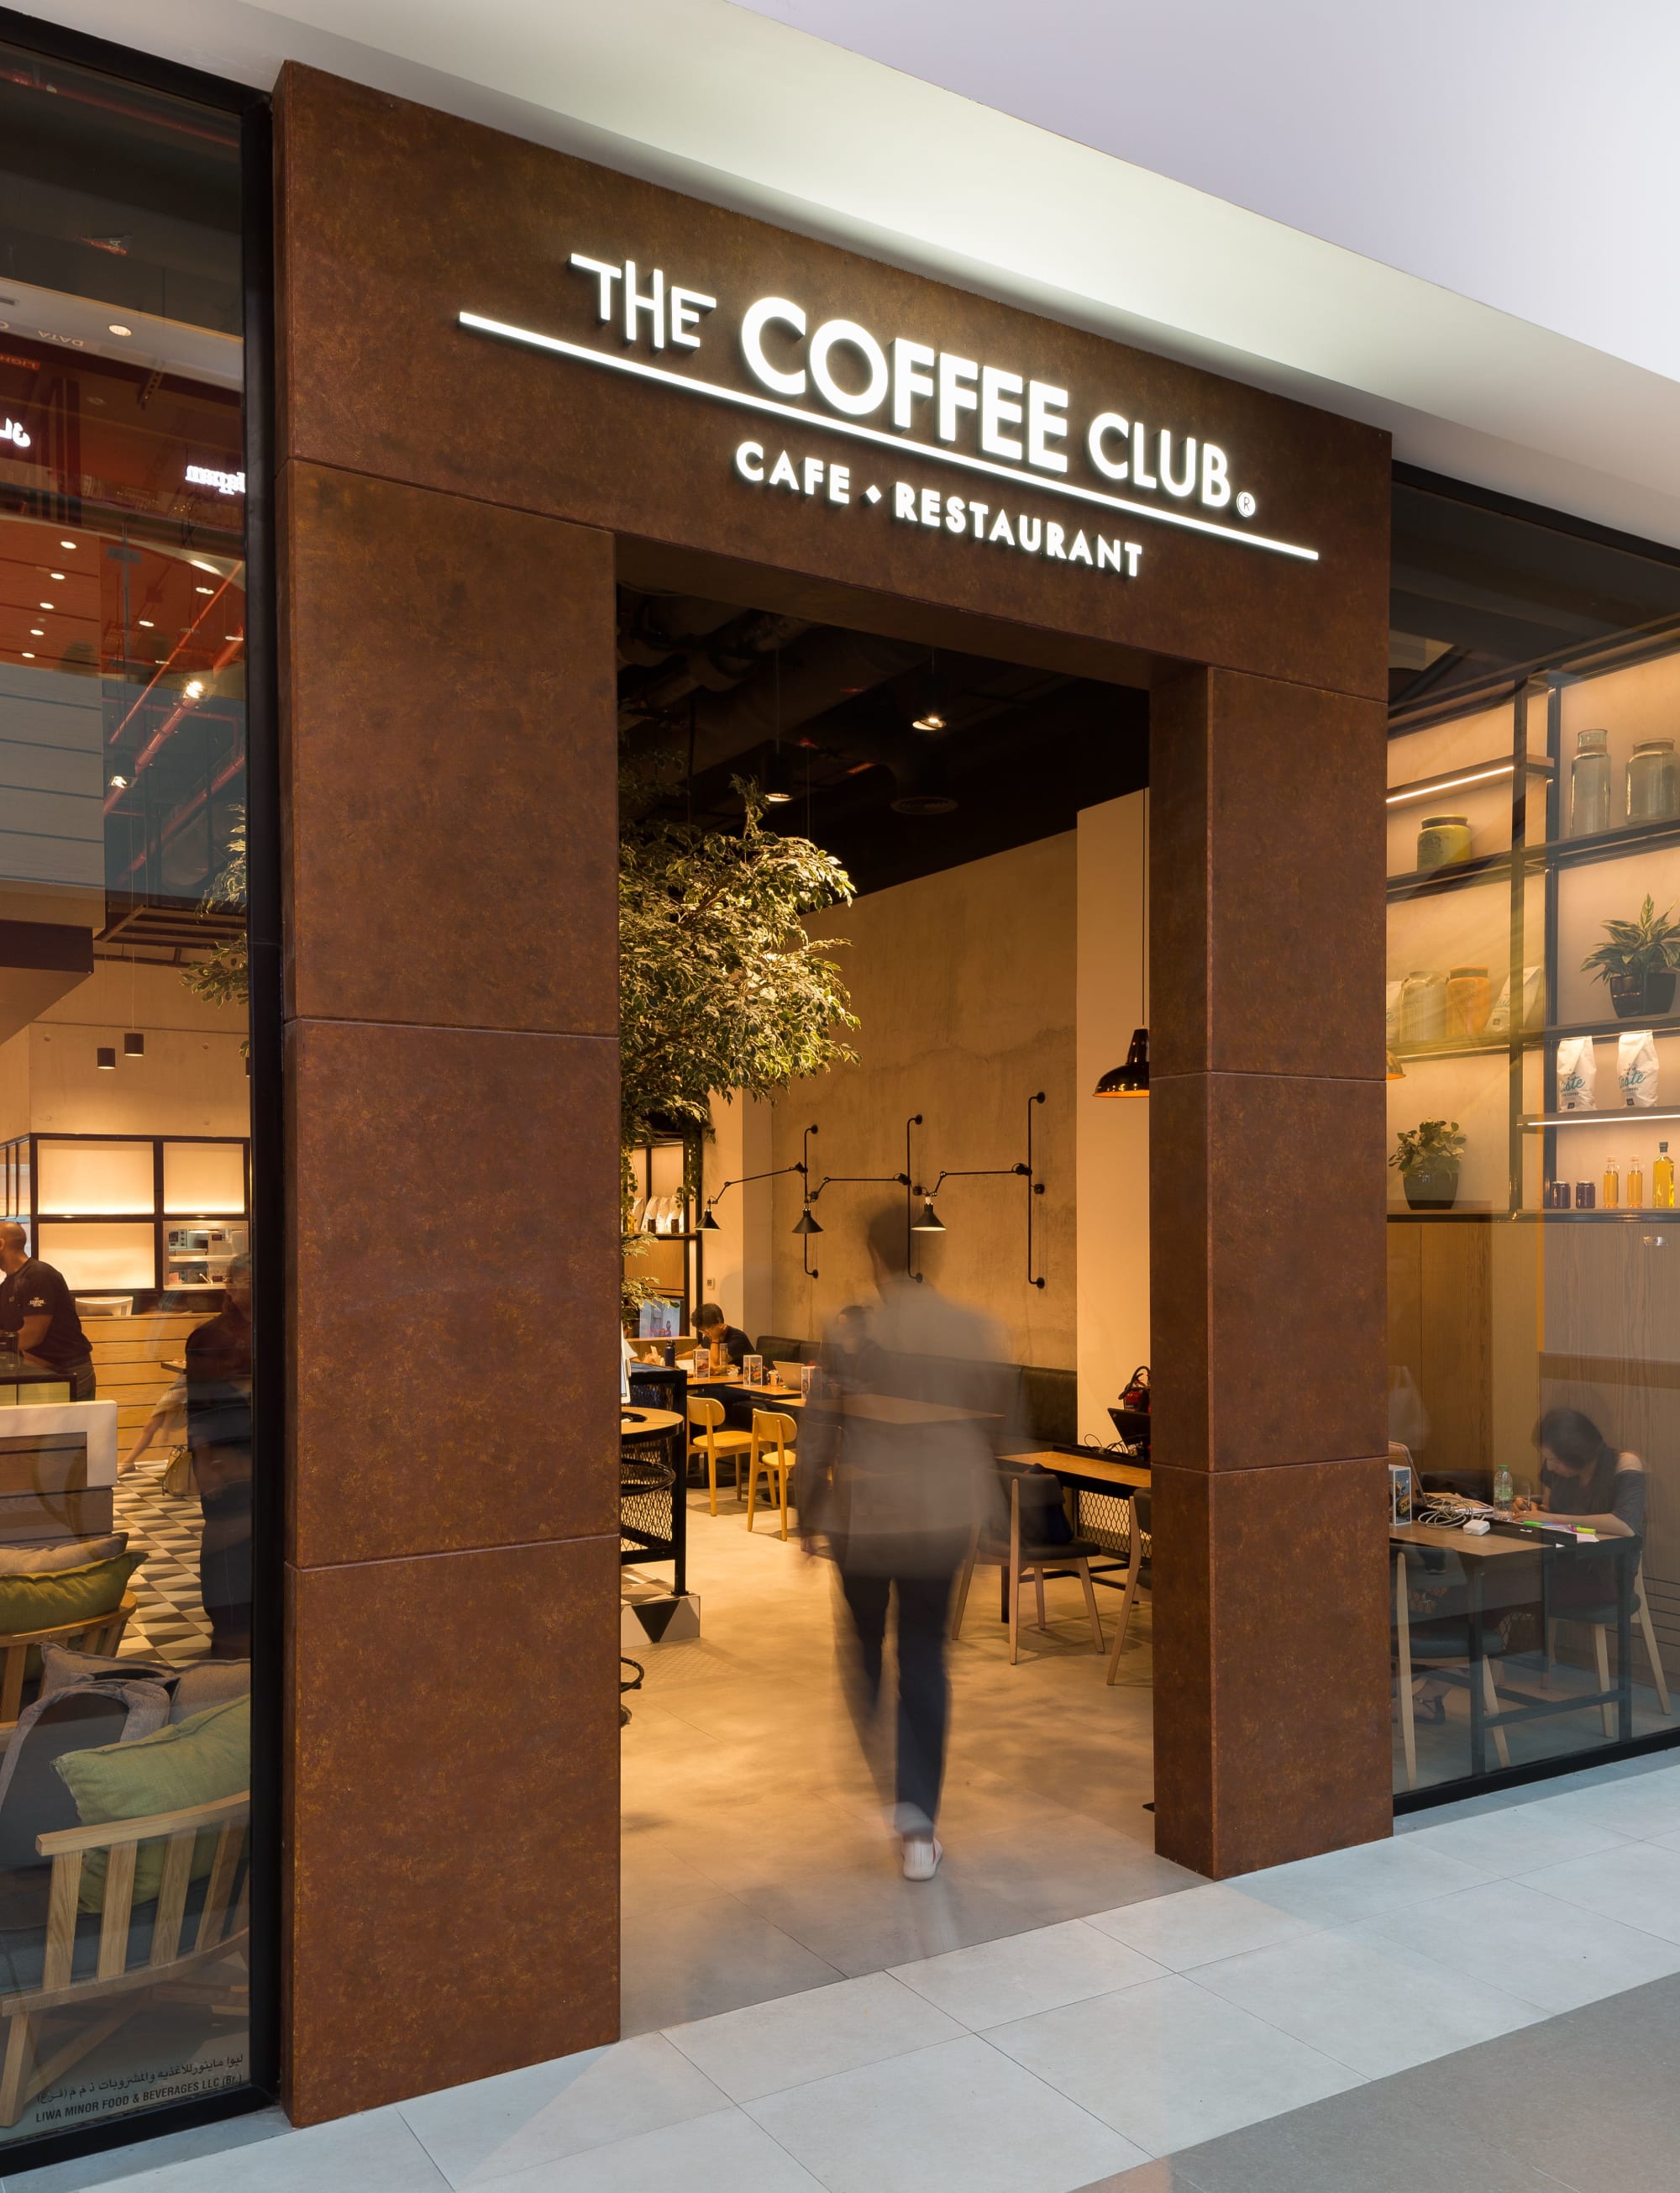 The Coffee Club Marina Mall By Aces Of Space Seen At The Coffee Club Marina Mall أبو ظبي Wescover